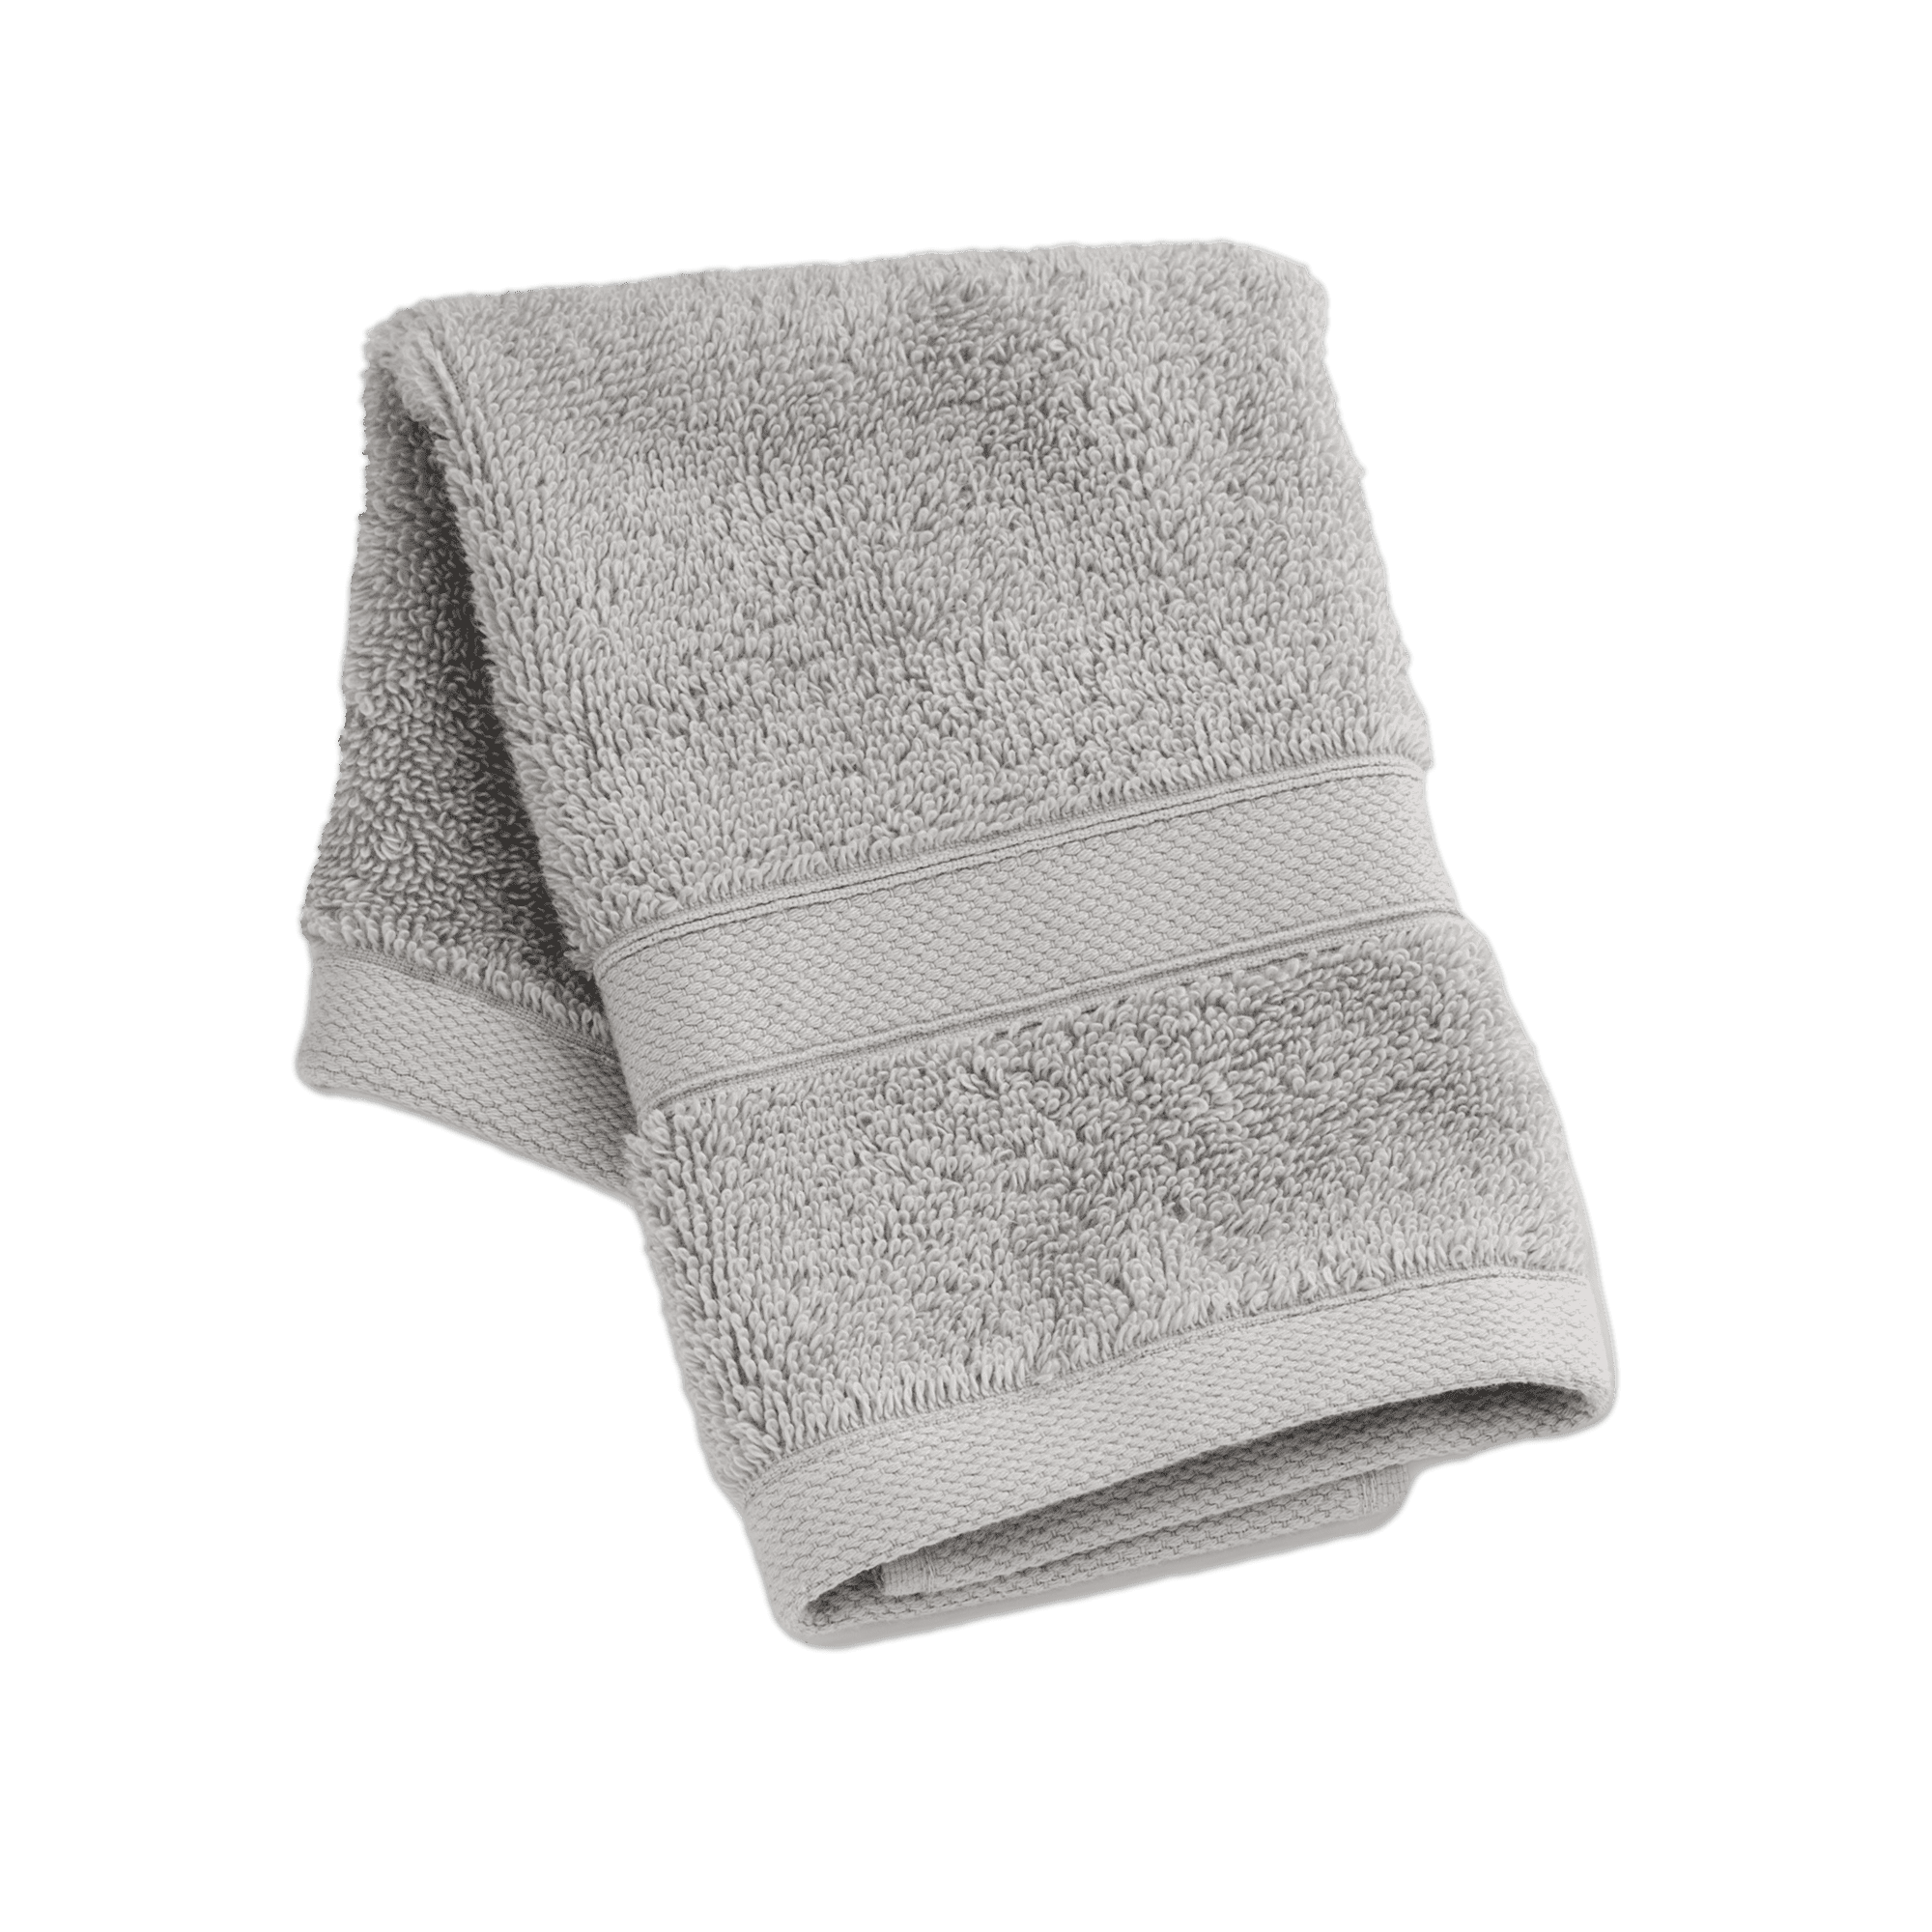 Buy Bath Towels Online | Bath Towels Online | Bath Towels for Premium Comfort and Style - OMA Living